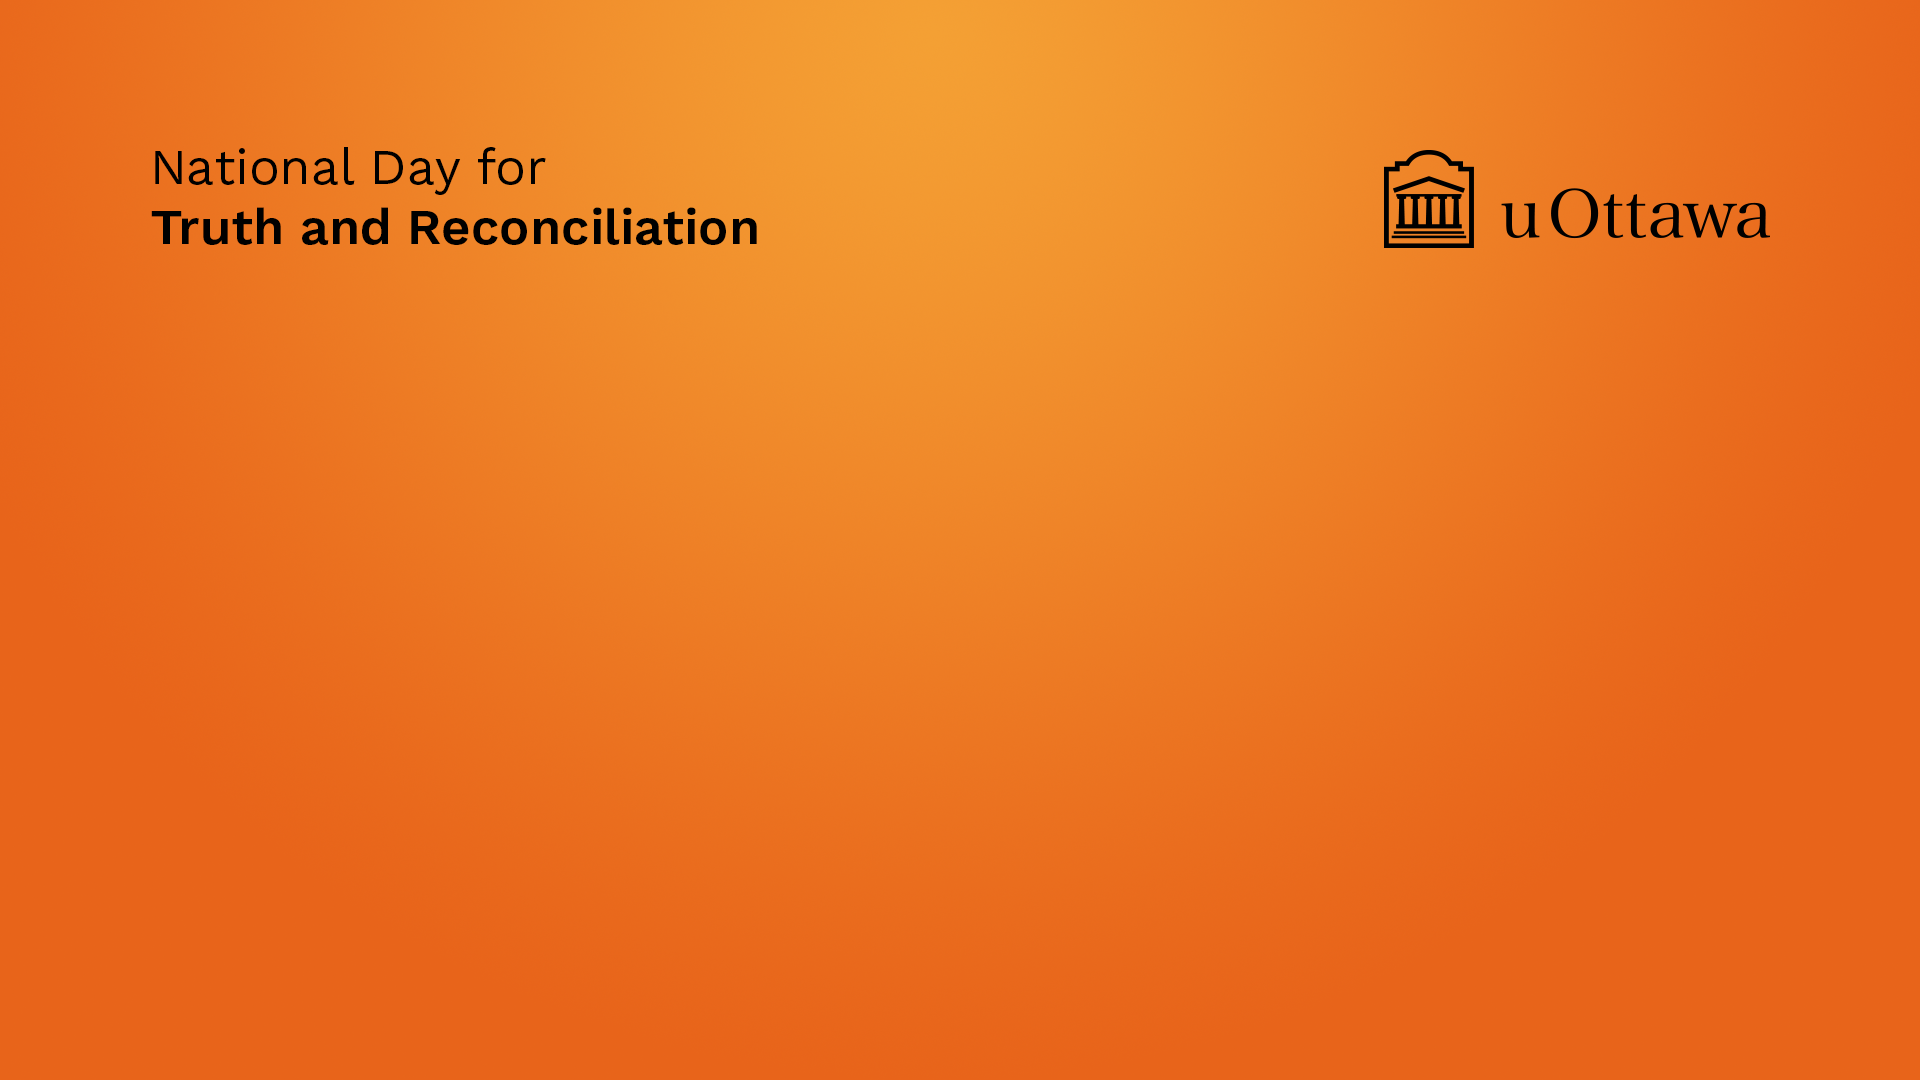 Orange background image with the uOttawa logo with a text that reads National Day for Truth and Reconciliation